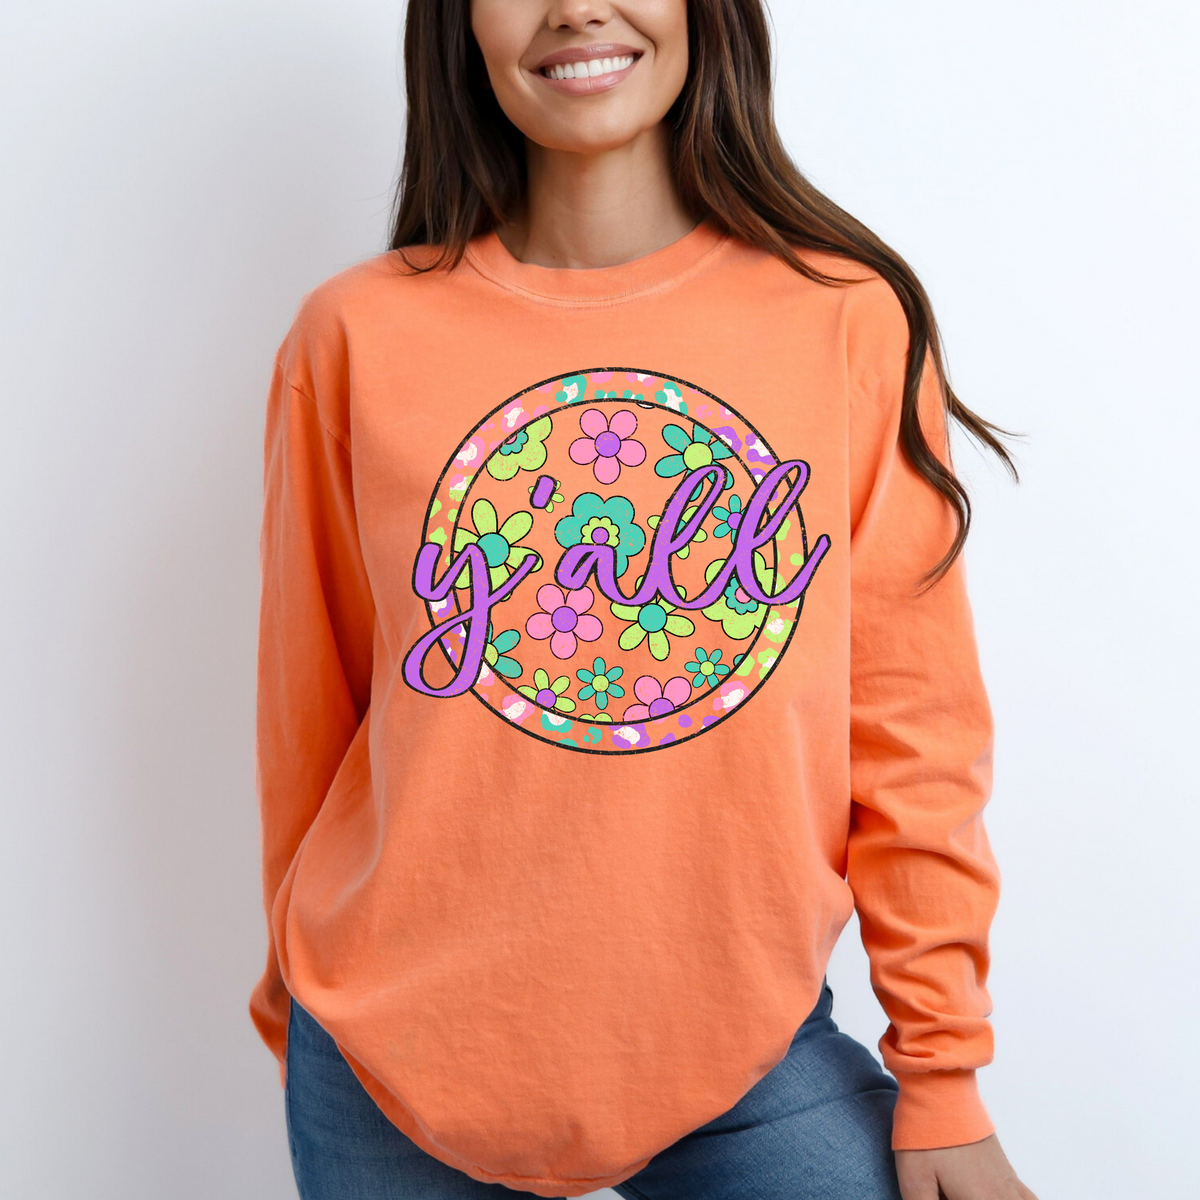 Y’all Groovy Leopard Translucent Cutout in Bright Cotton Candy Tones Digital Design, PNG